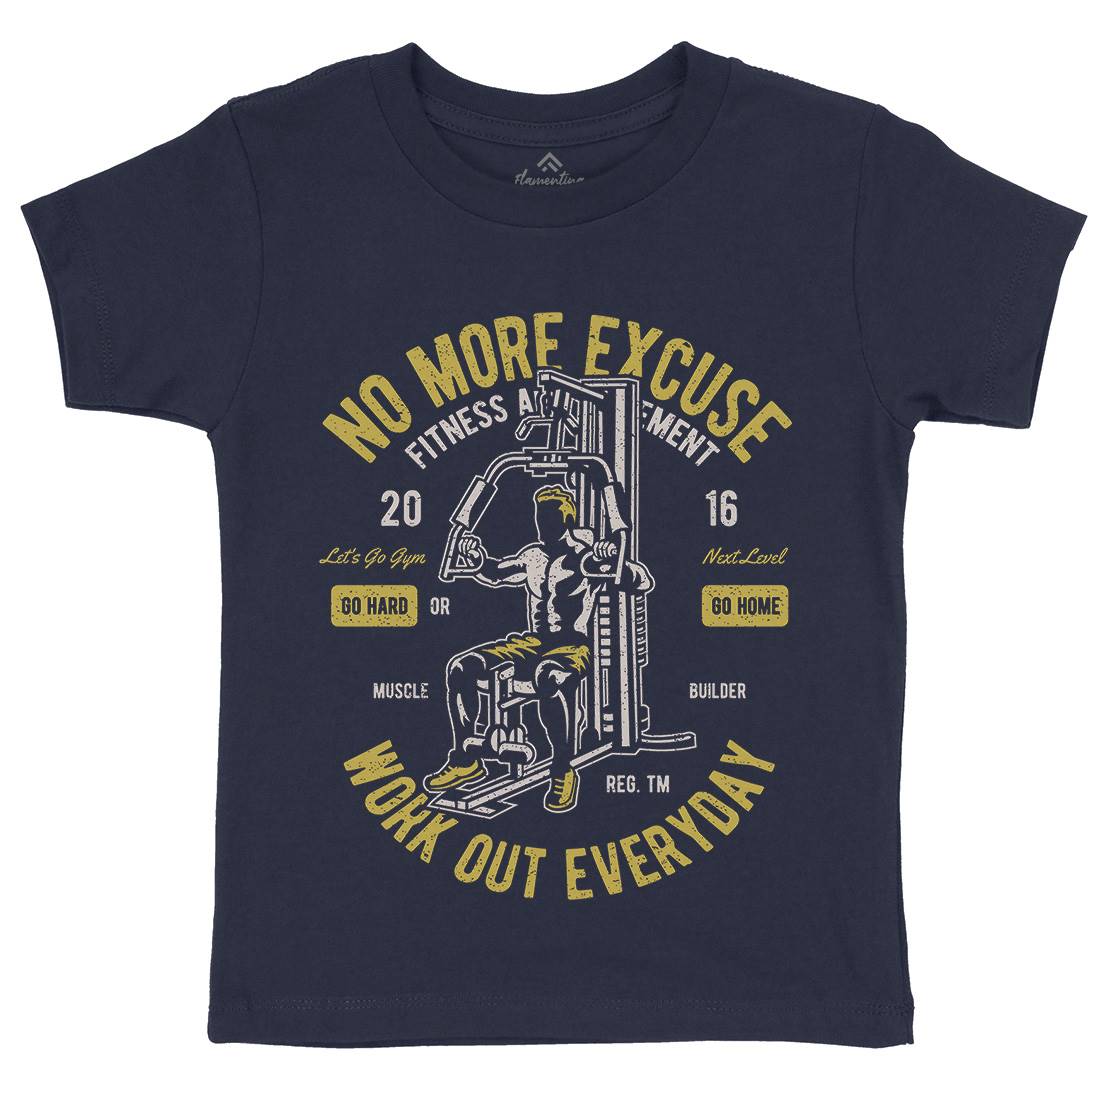 Work Out Everyday Kids Crew Neck T-Shirt Gym A198